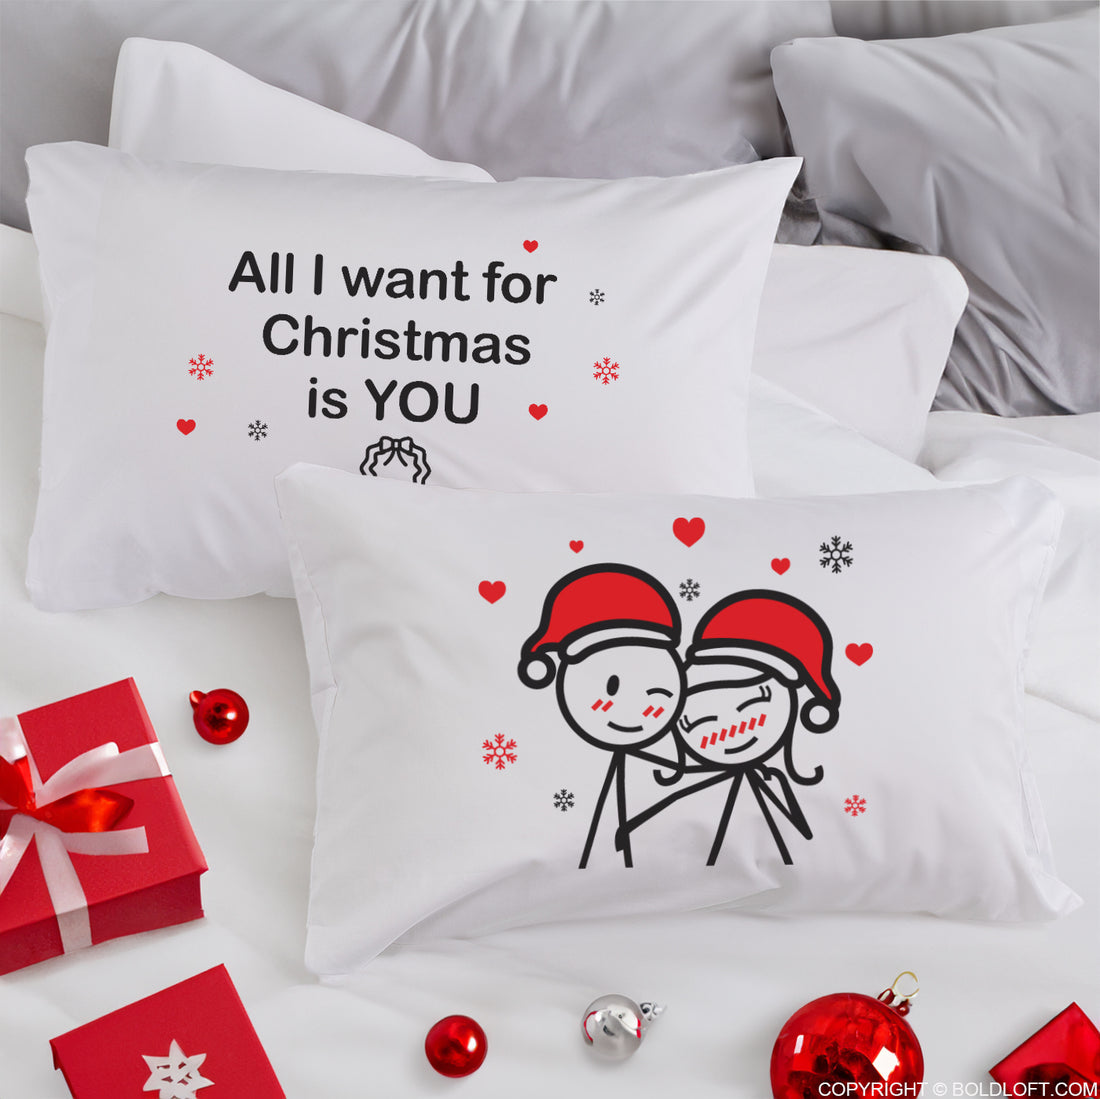 BoldLoft Merry Christmas Couple Pillowcases feature cute stick figures for him and her